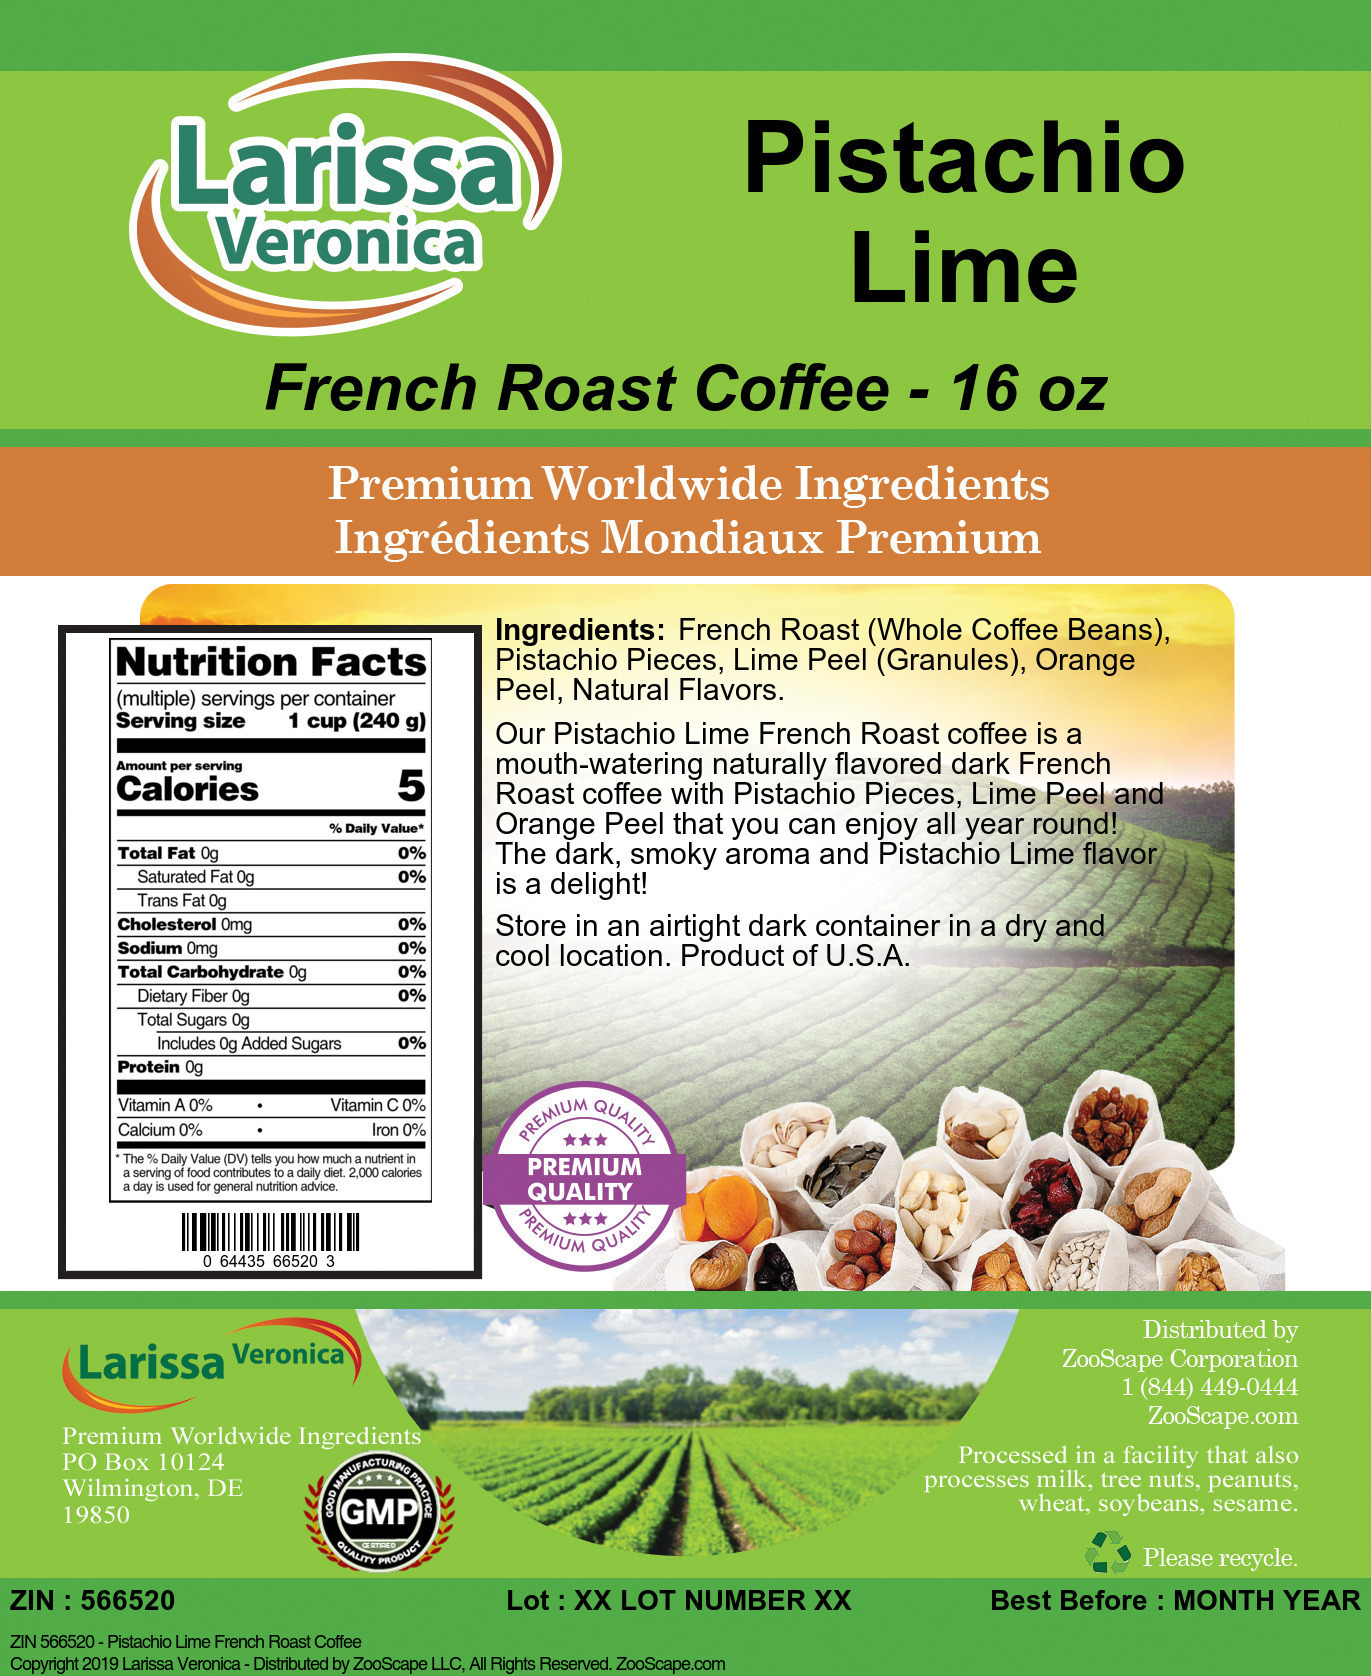 Pistachio Lime French Roast Coffee - Label